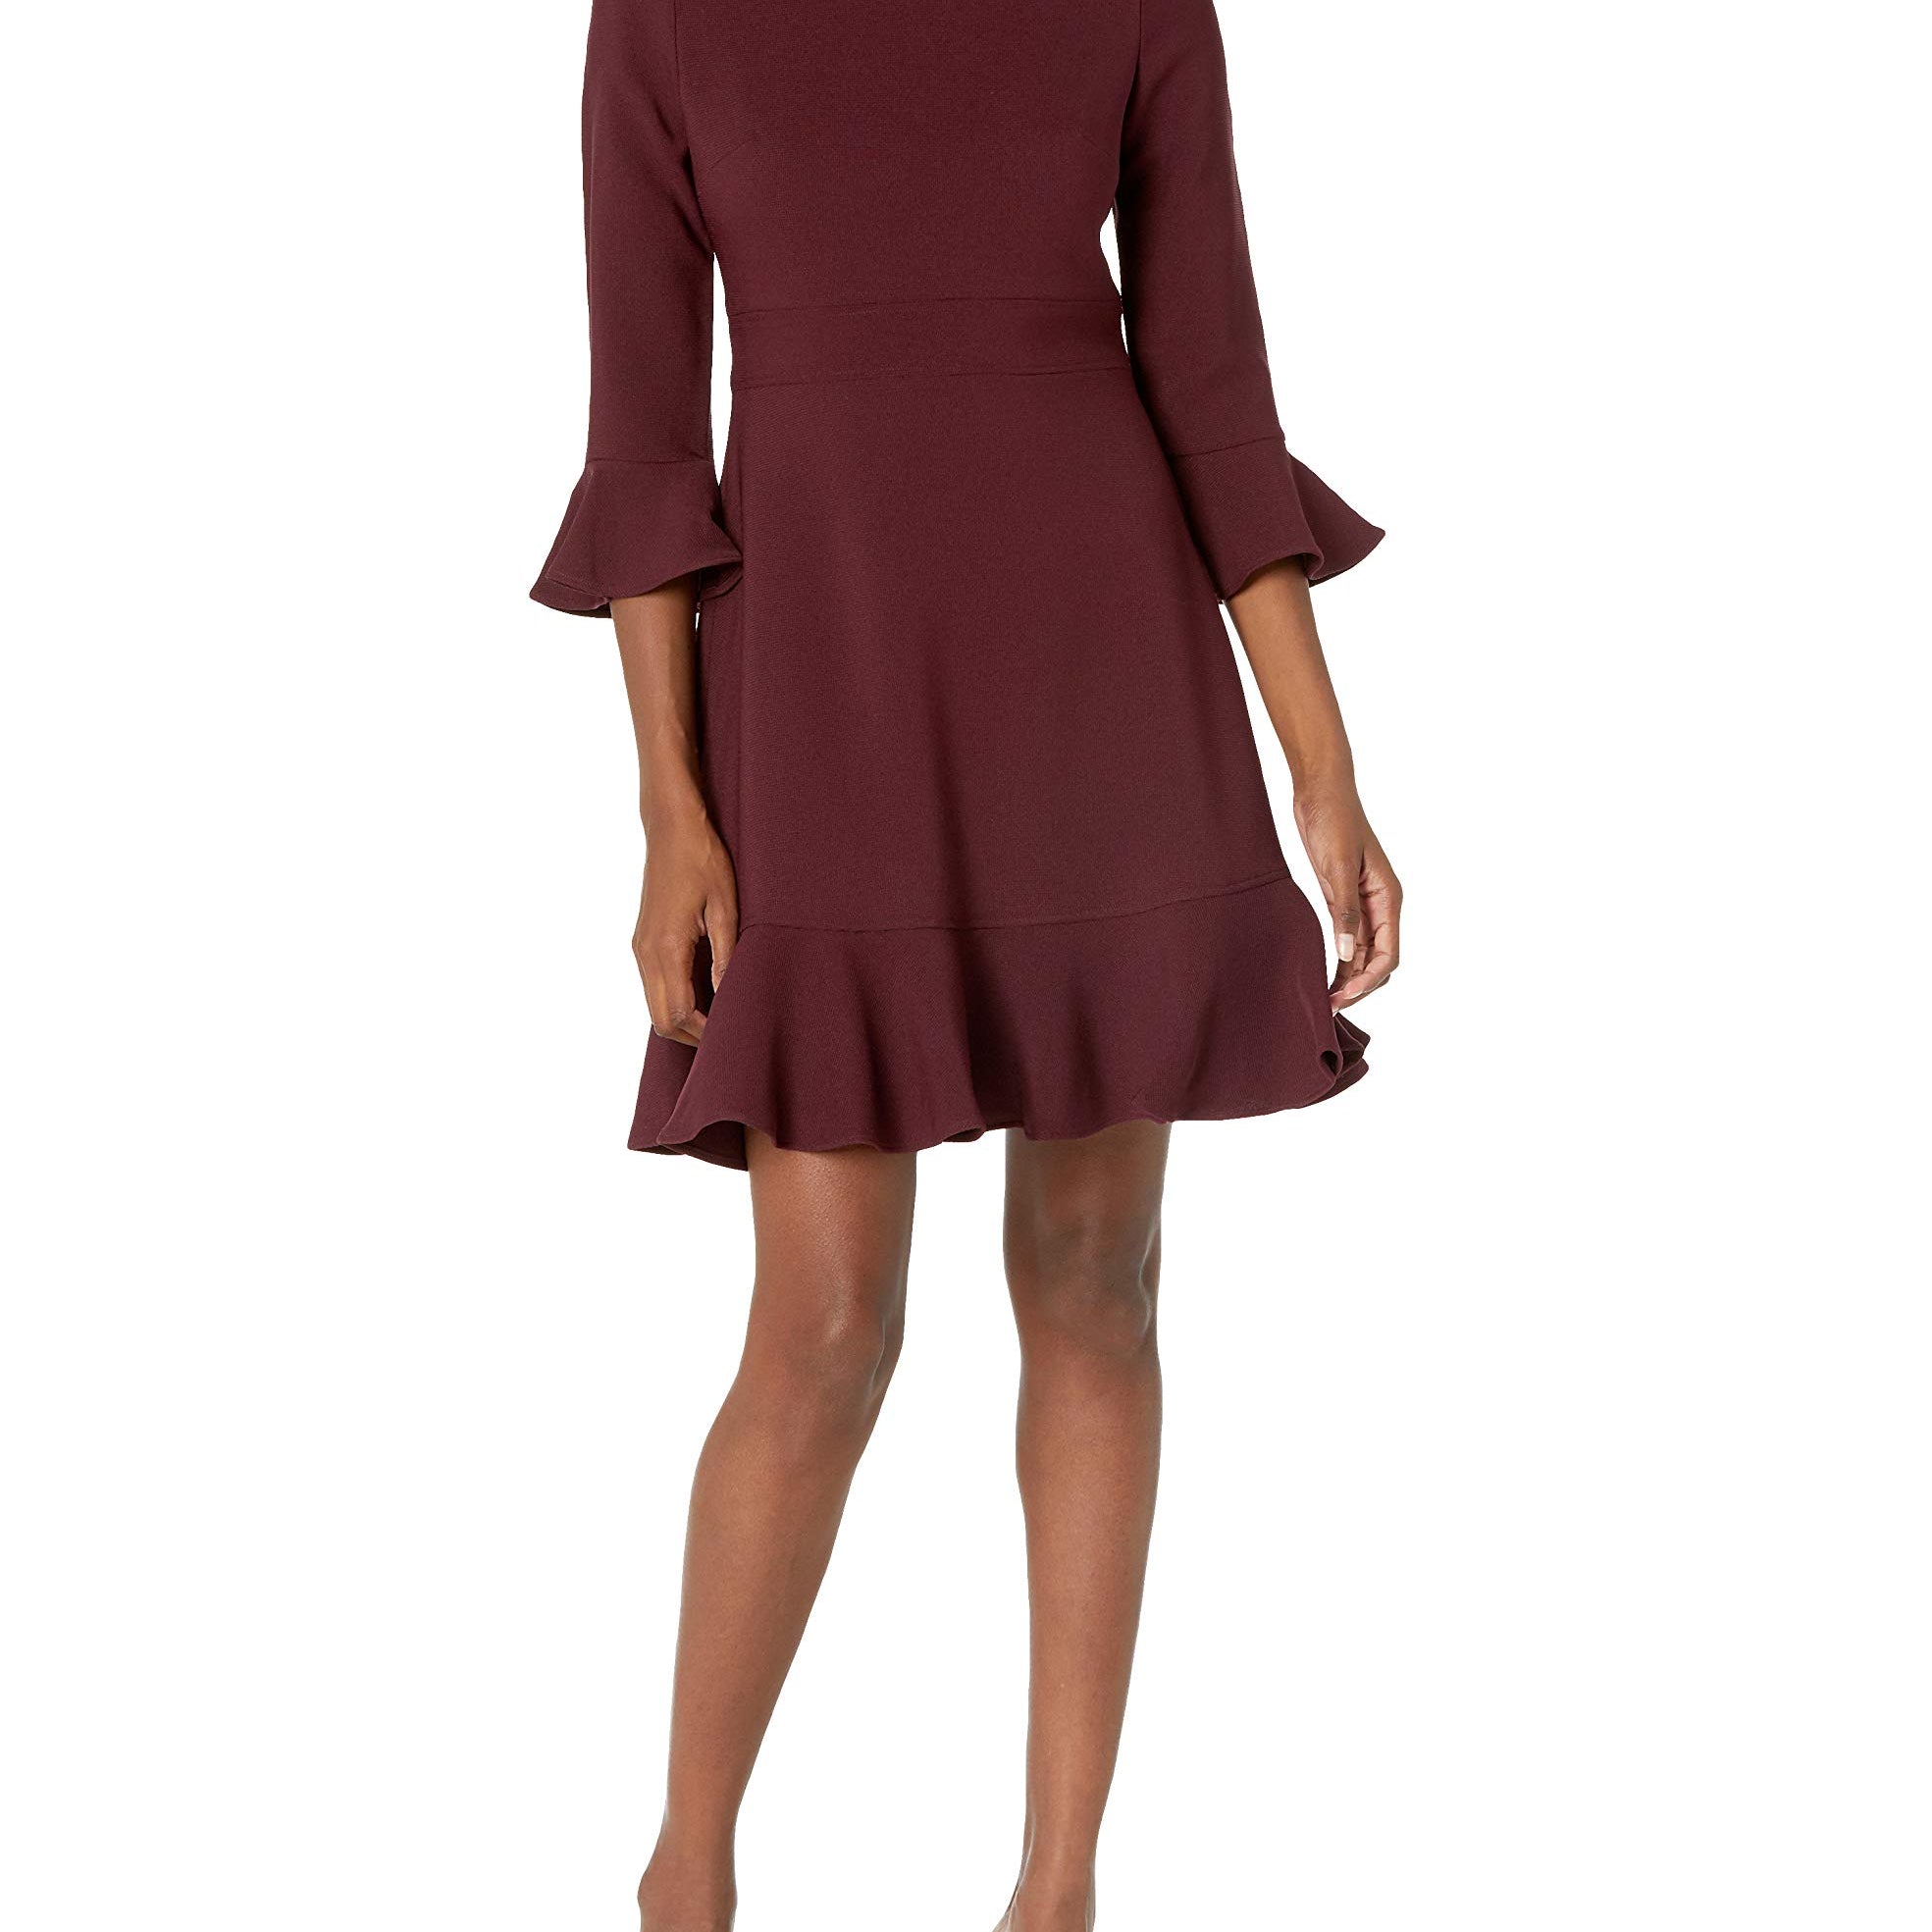 Eliza J Women's Bell Sleeve Fit and Flare Dress with Flounce Hem